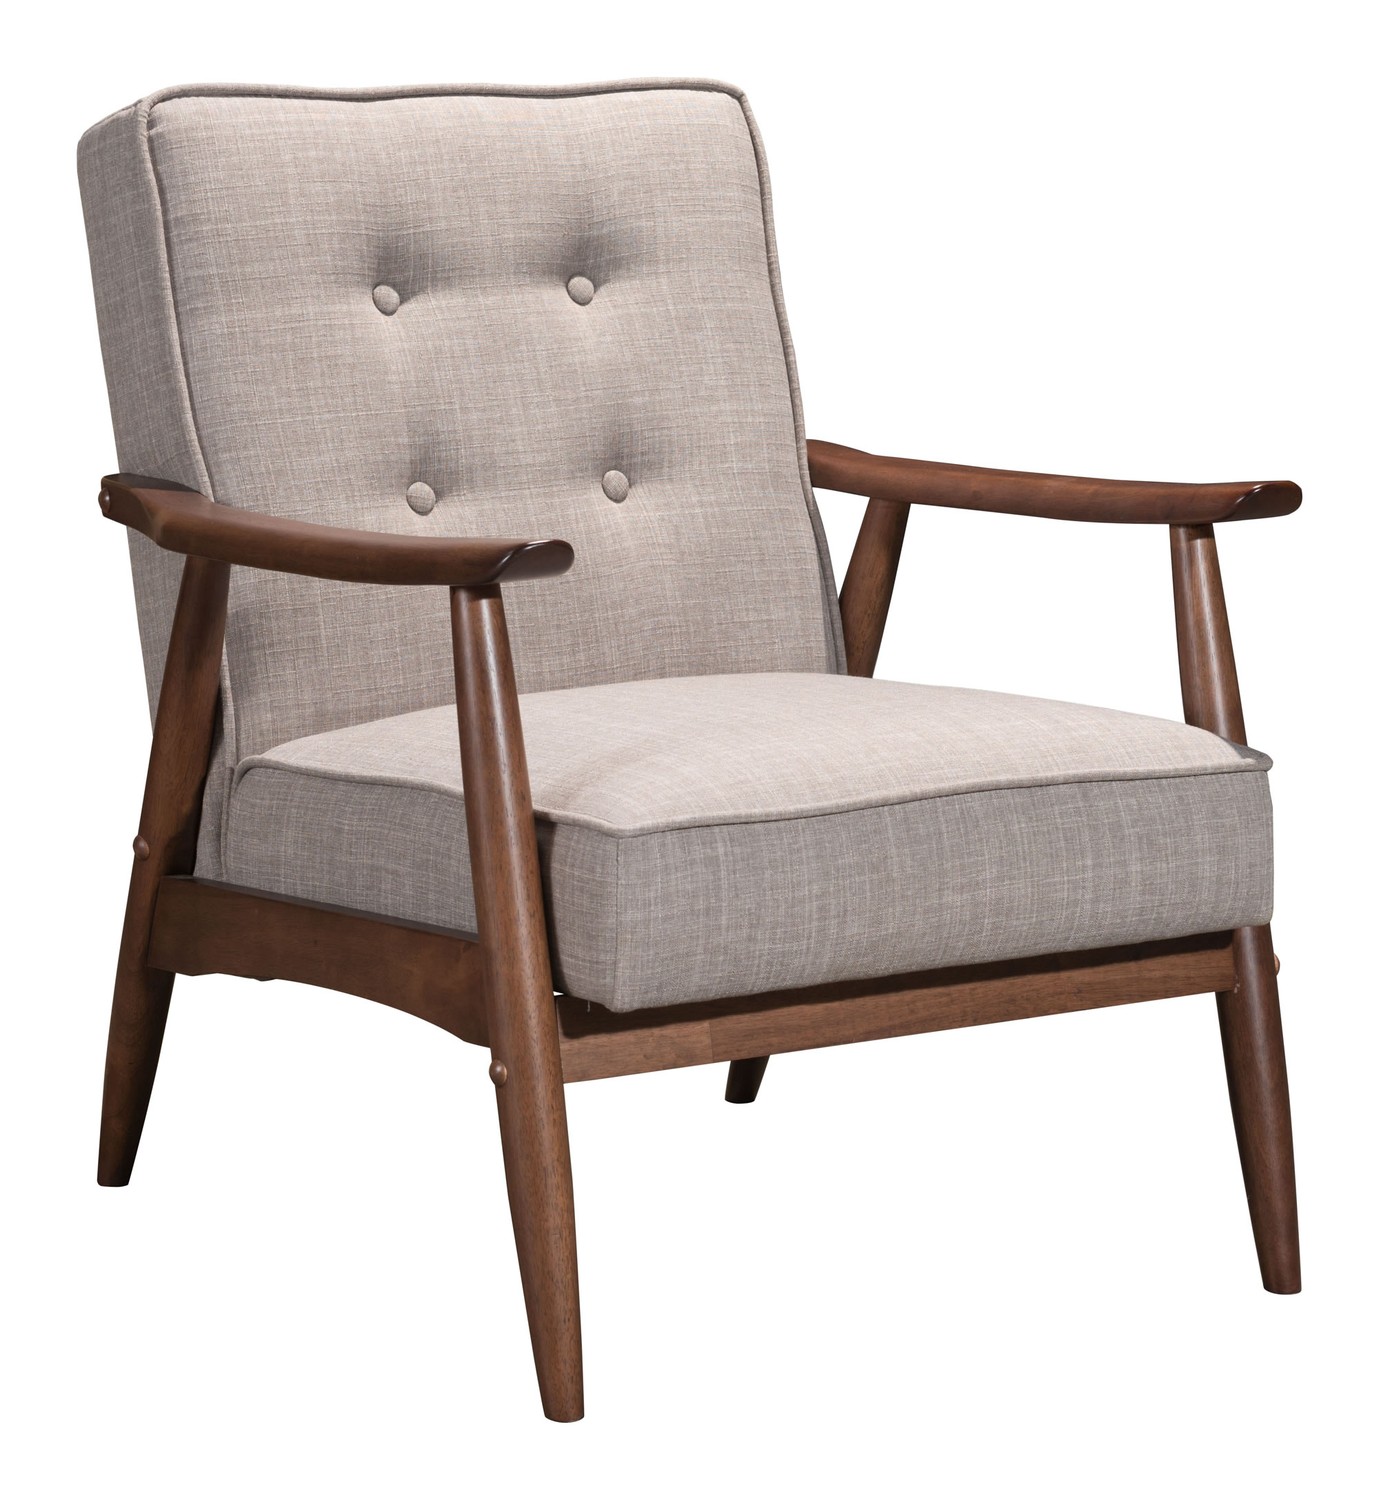 27.2" x 32.1" x 32.9" Putty, Poly Linen, Rubberwood, Arm Chair